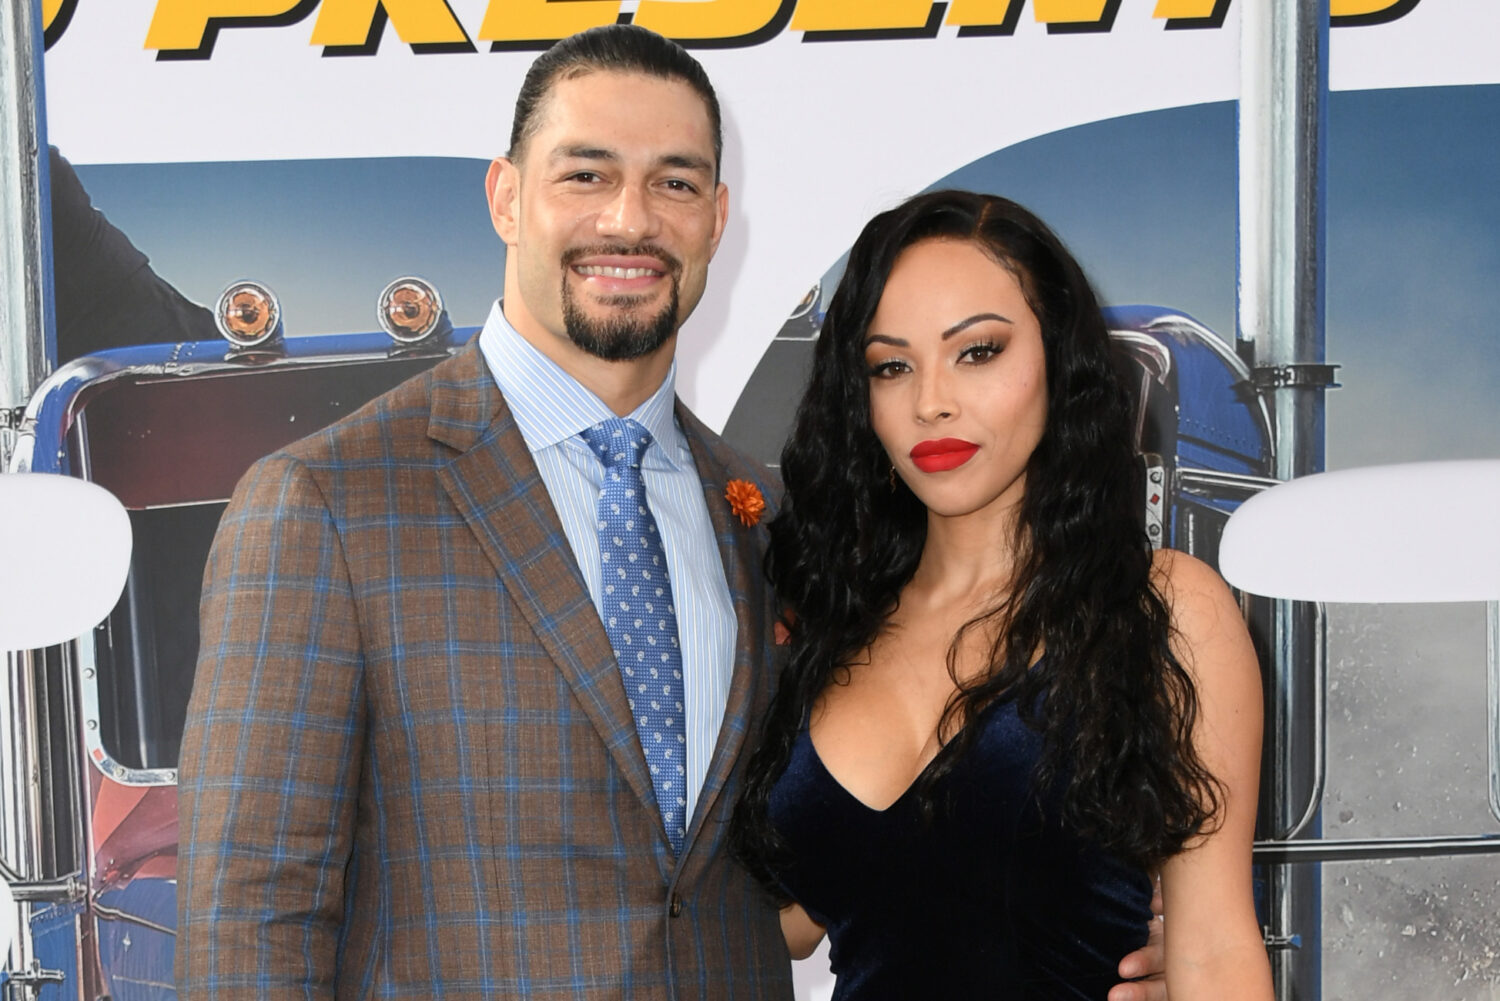 Galina Becker Who is Roman Reigns’ Wife?